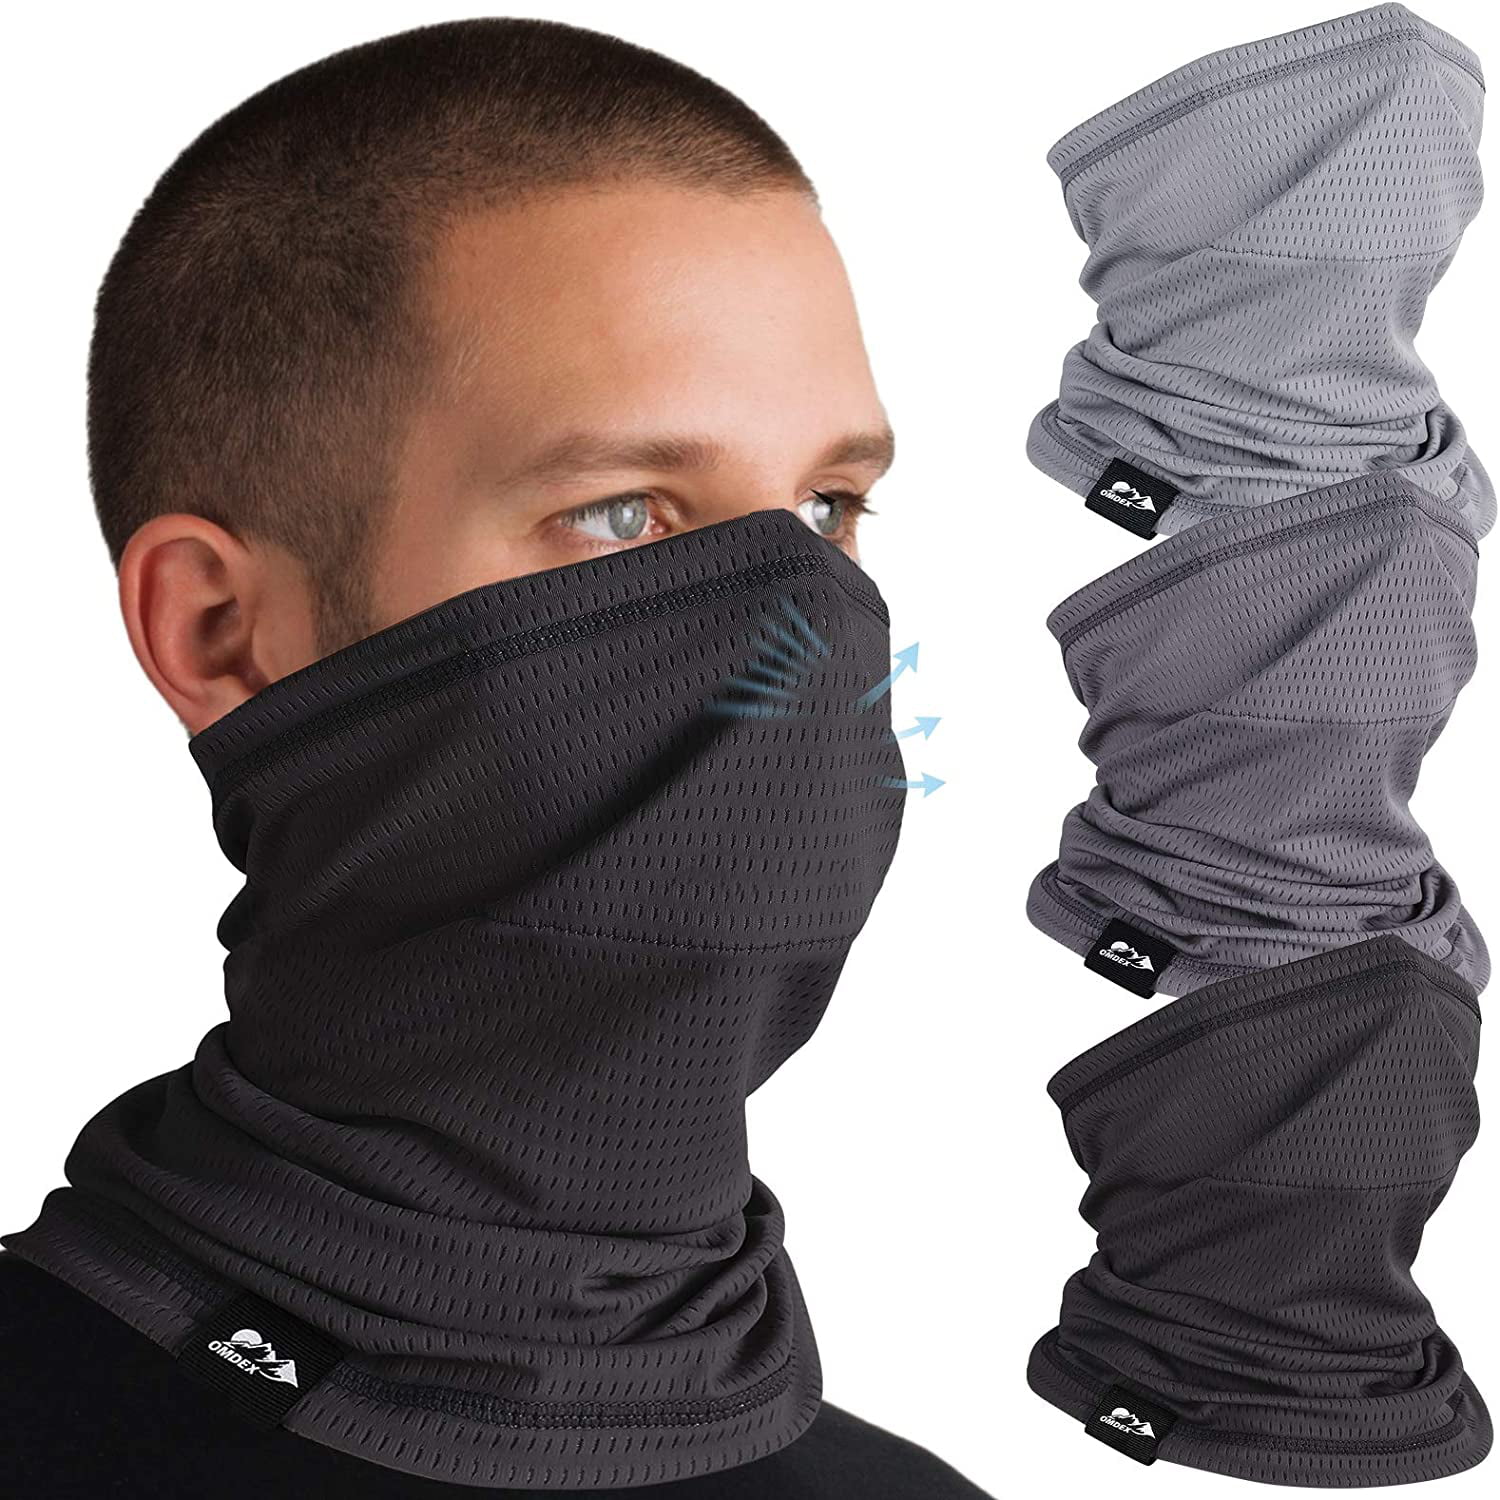 Ice Silk Cooling Sports Face Scarf Summer Face Mask Protection from Dust for Men Women Sports&Outdoors 3 Pack Neck Gaiter Balaclava Bandana Headwear